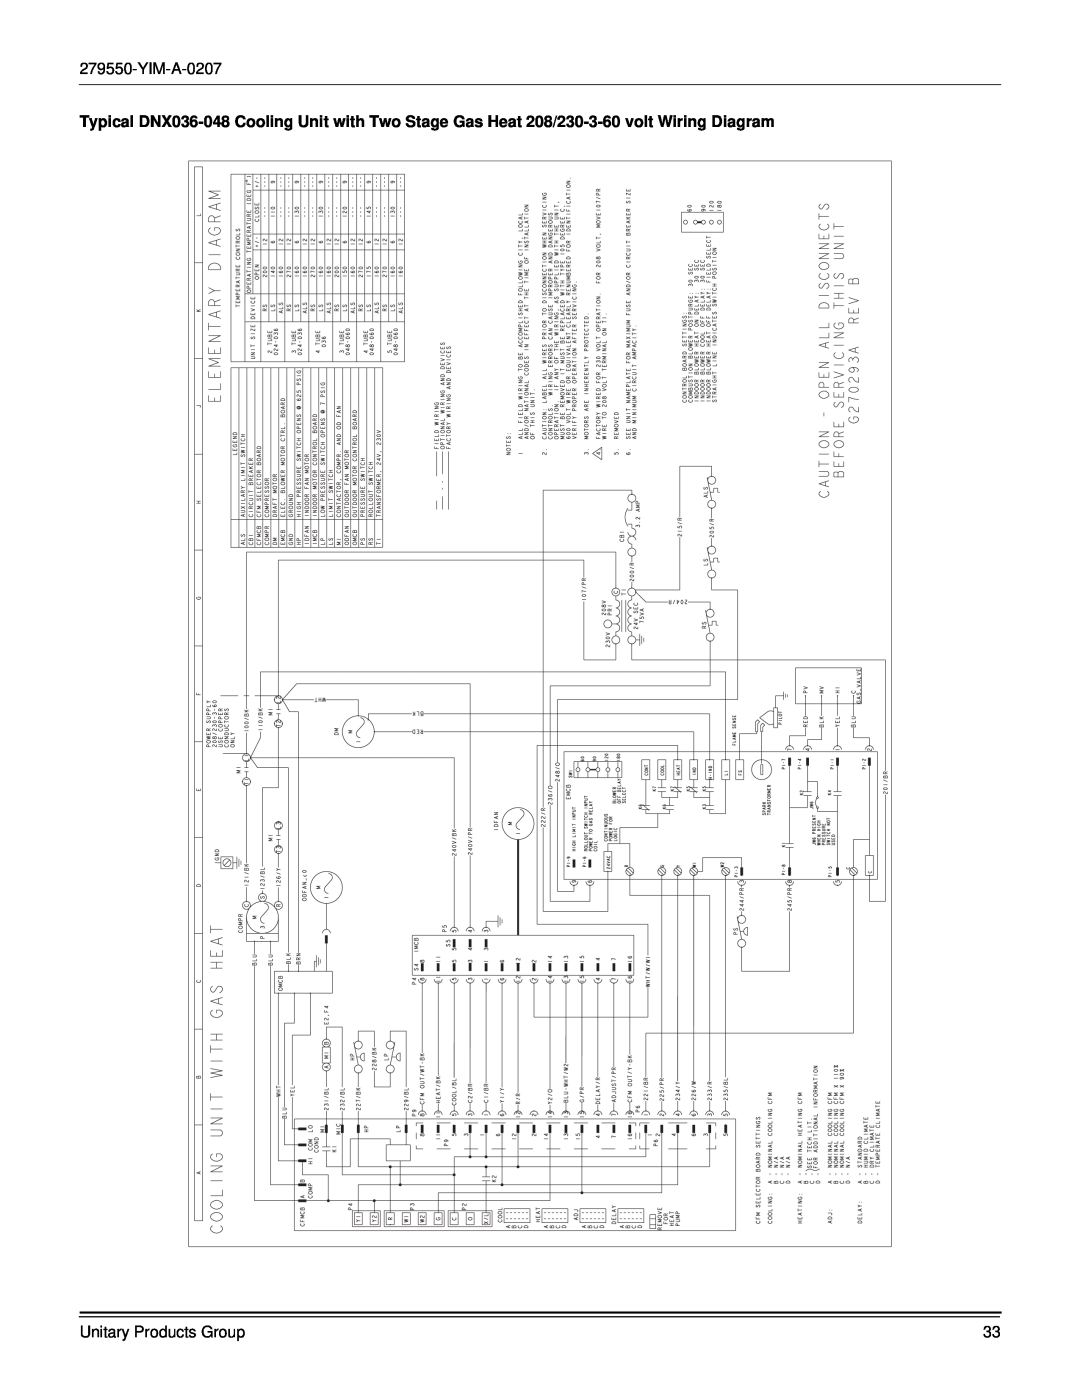 York R-410A dimensions YIM-A-0207, Unitary Products Group 